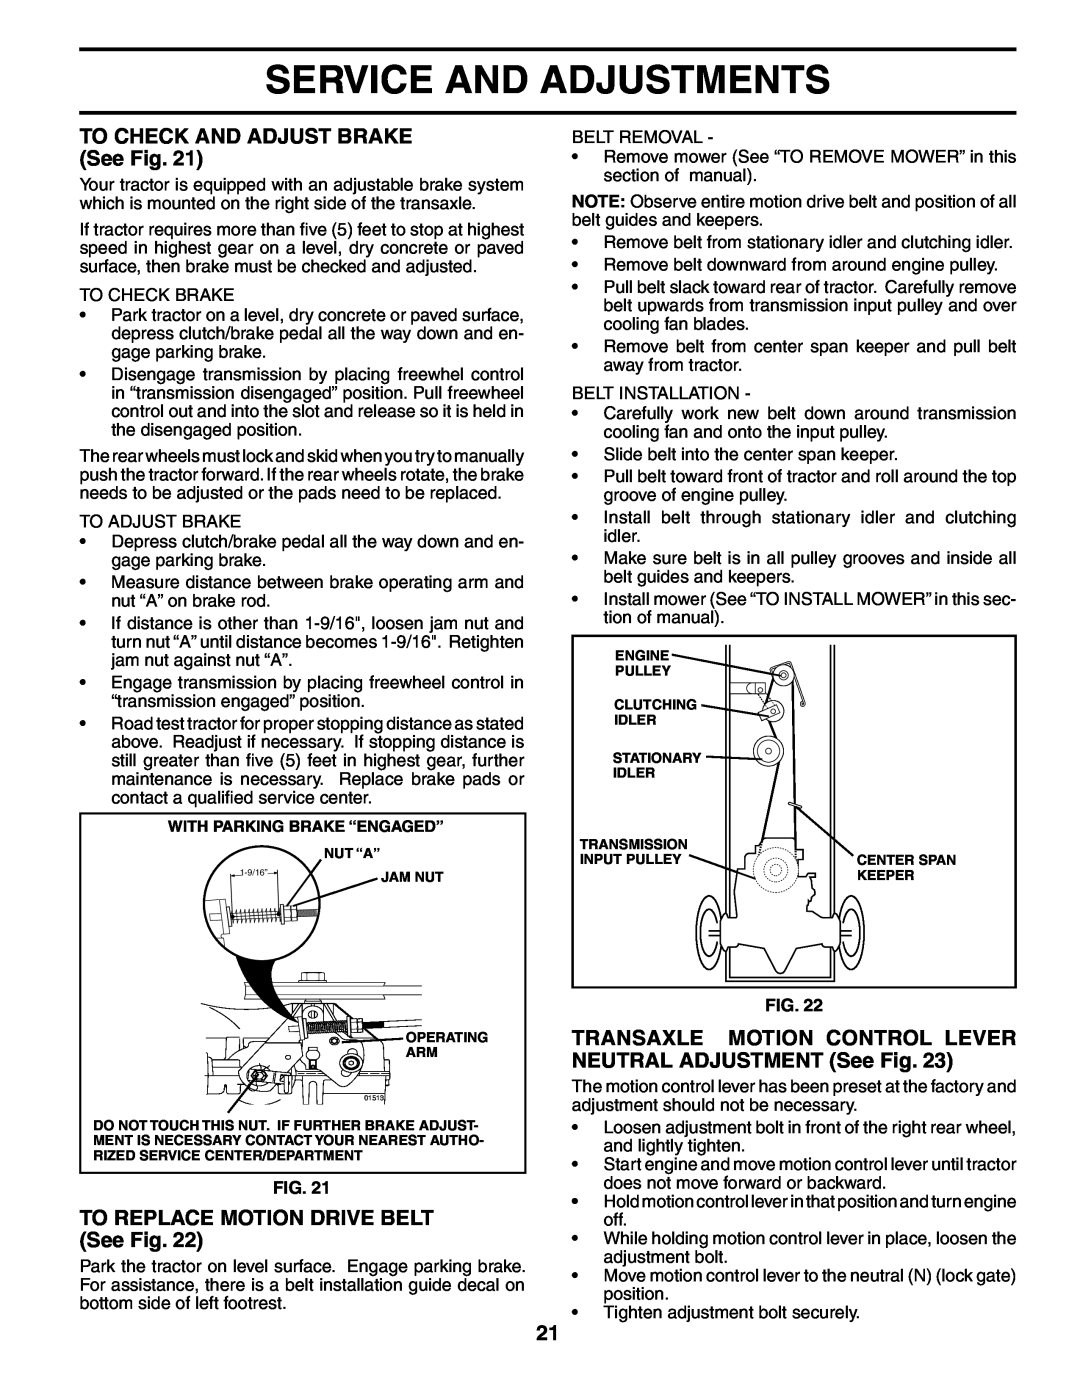 Ryobi 197788 manual TO CHECK AND ADJUST BRAKE See Fig, TO REPLACE MOTION DRIVE BELT See Fig, Service And Adjustments 